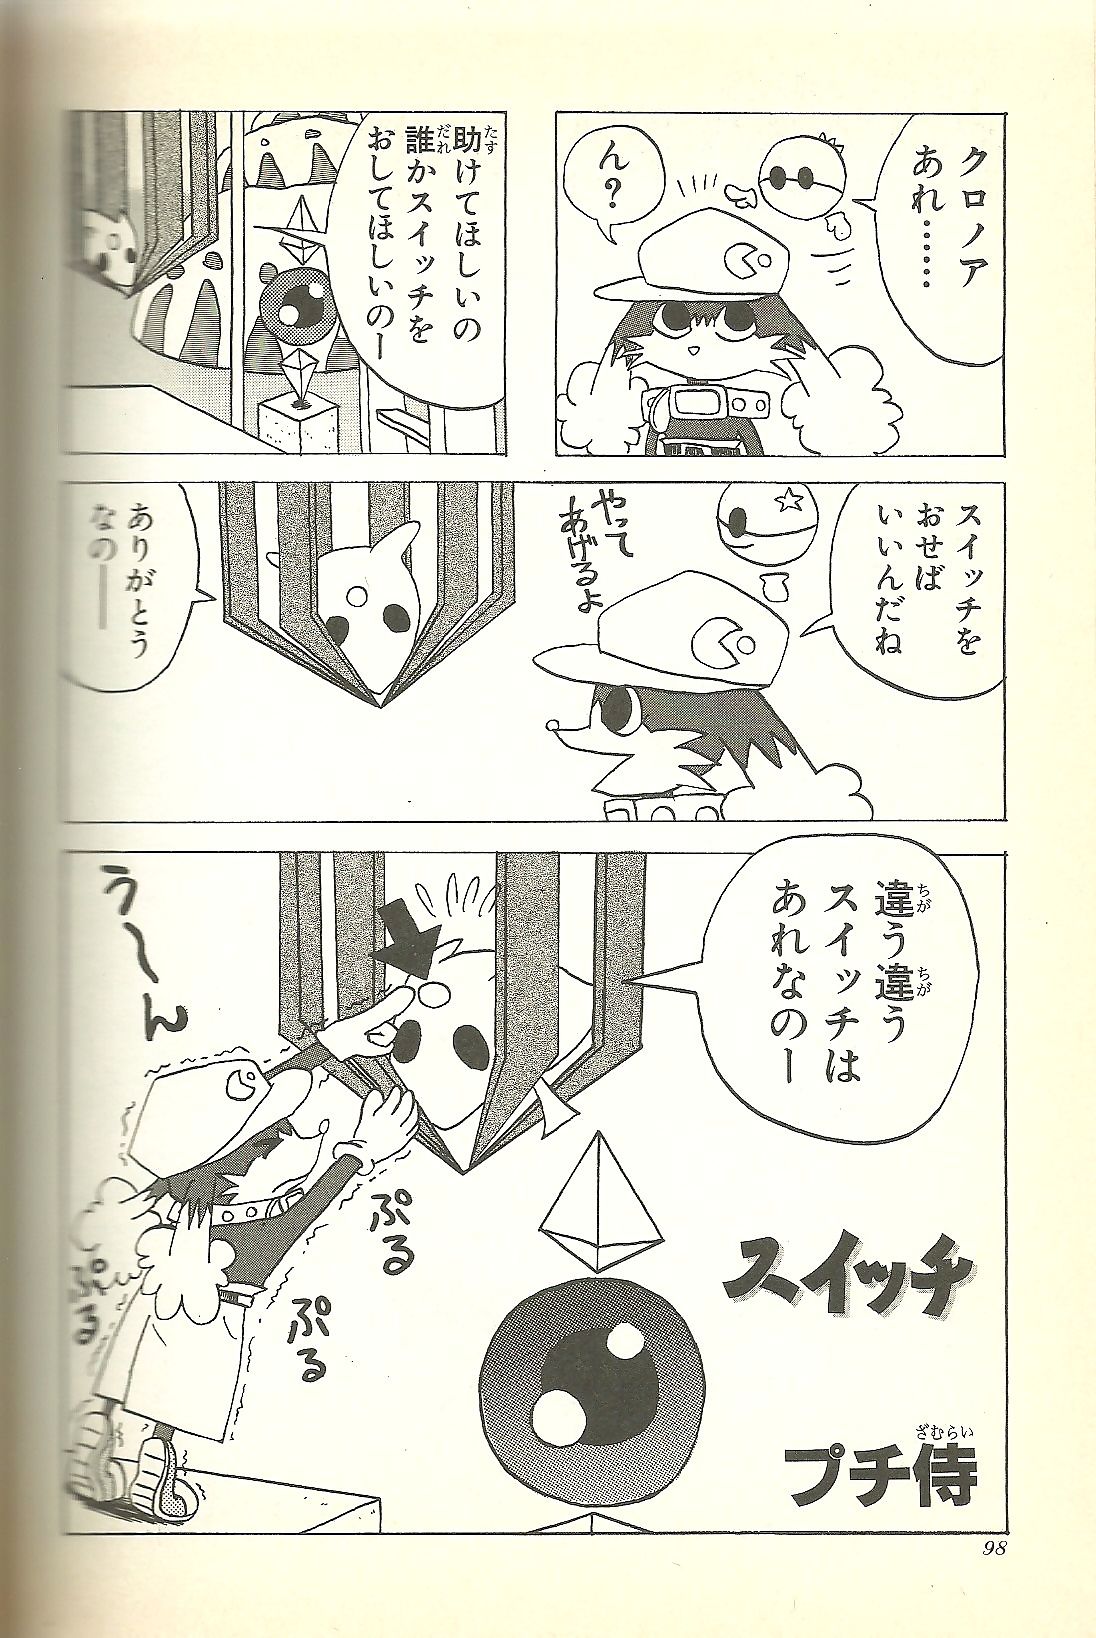 Klonoa of the Wind: Four Cell Manga Theatre - part 6